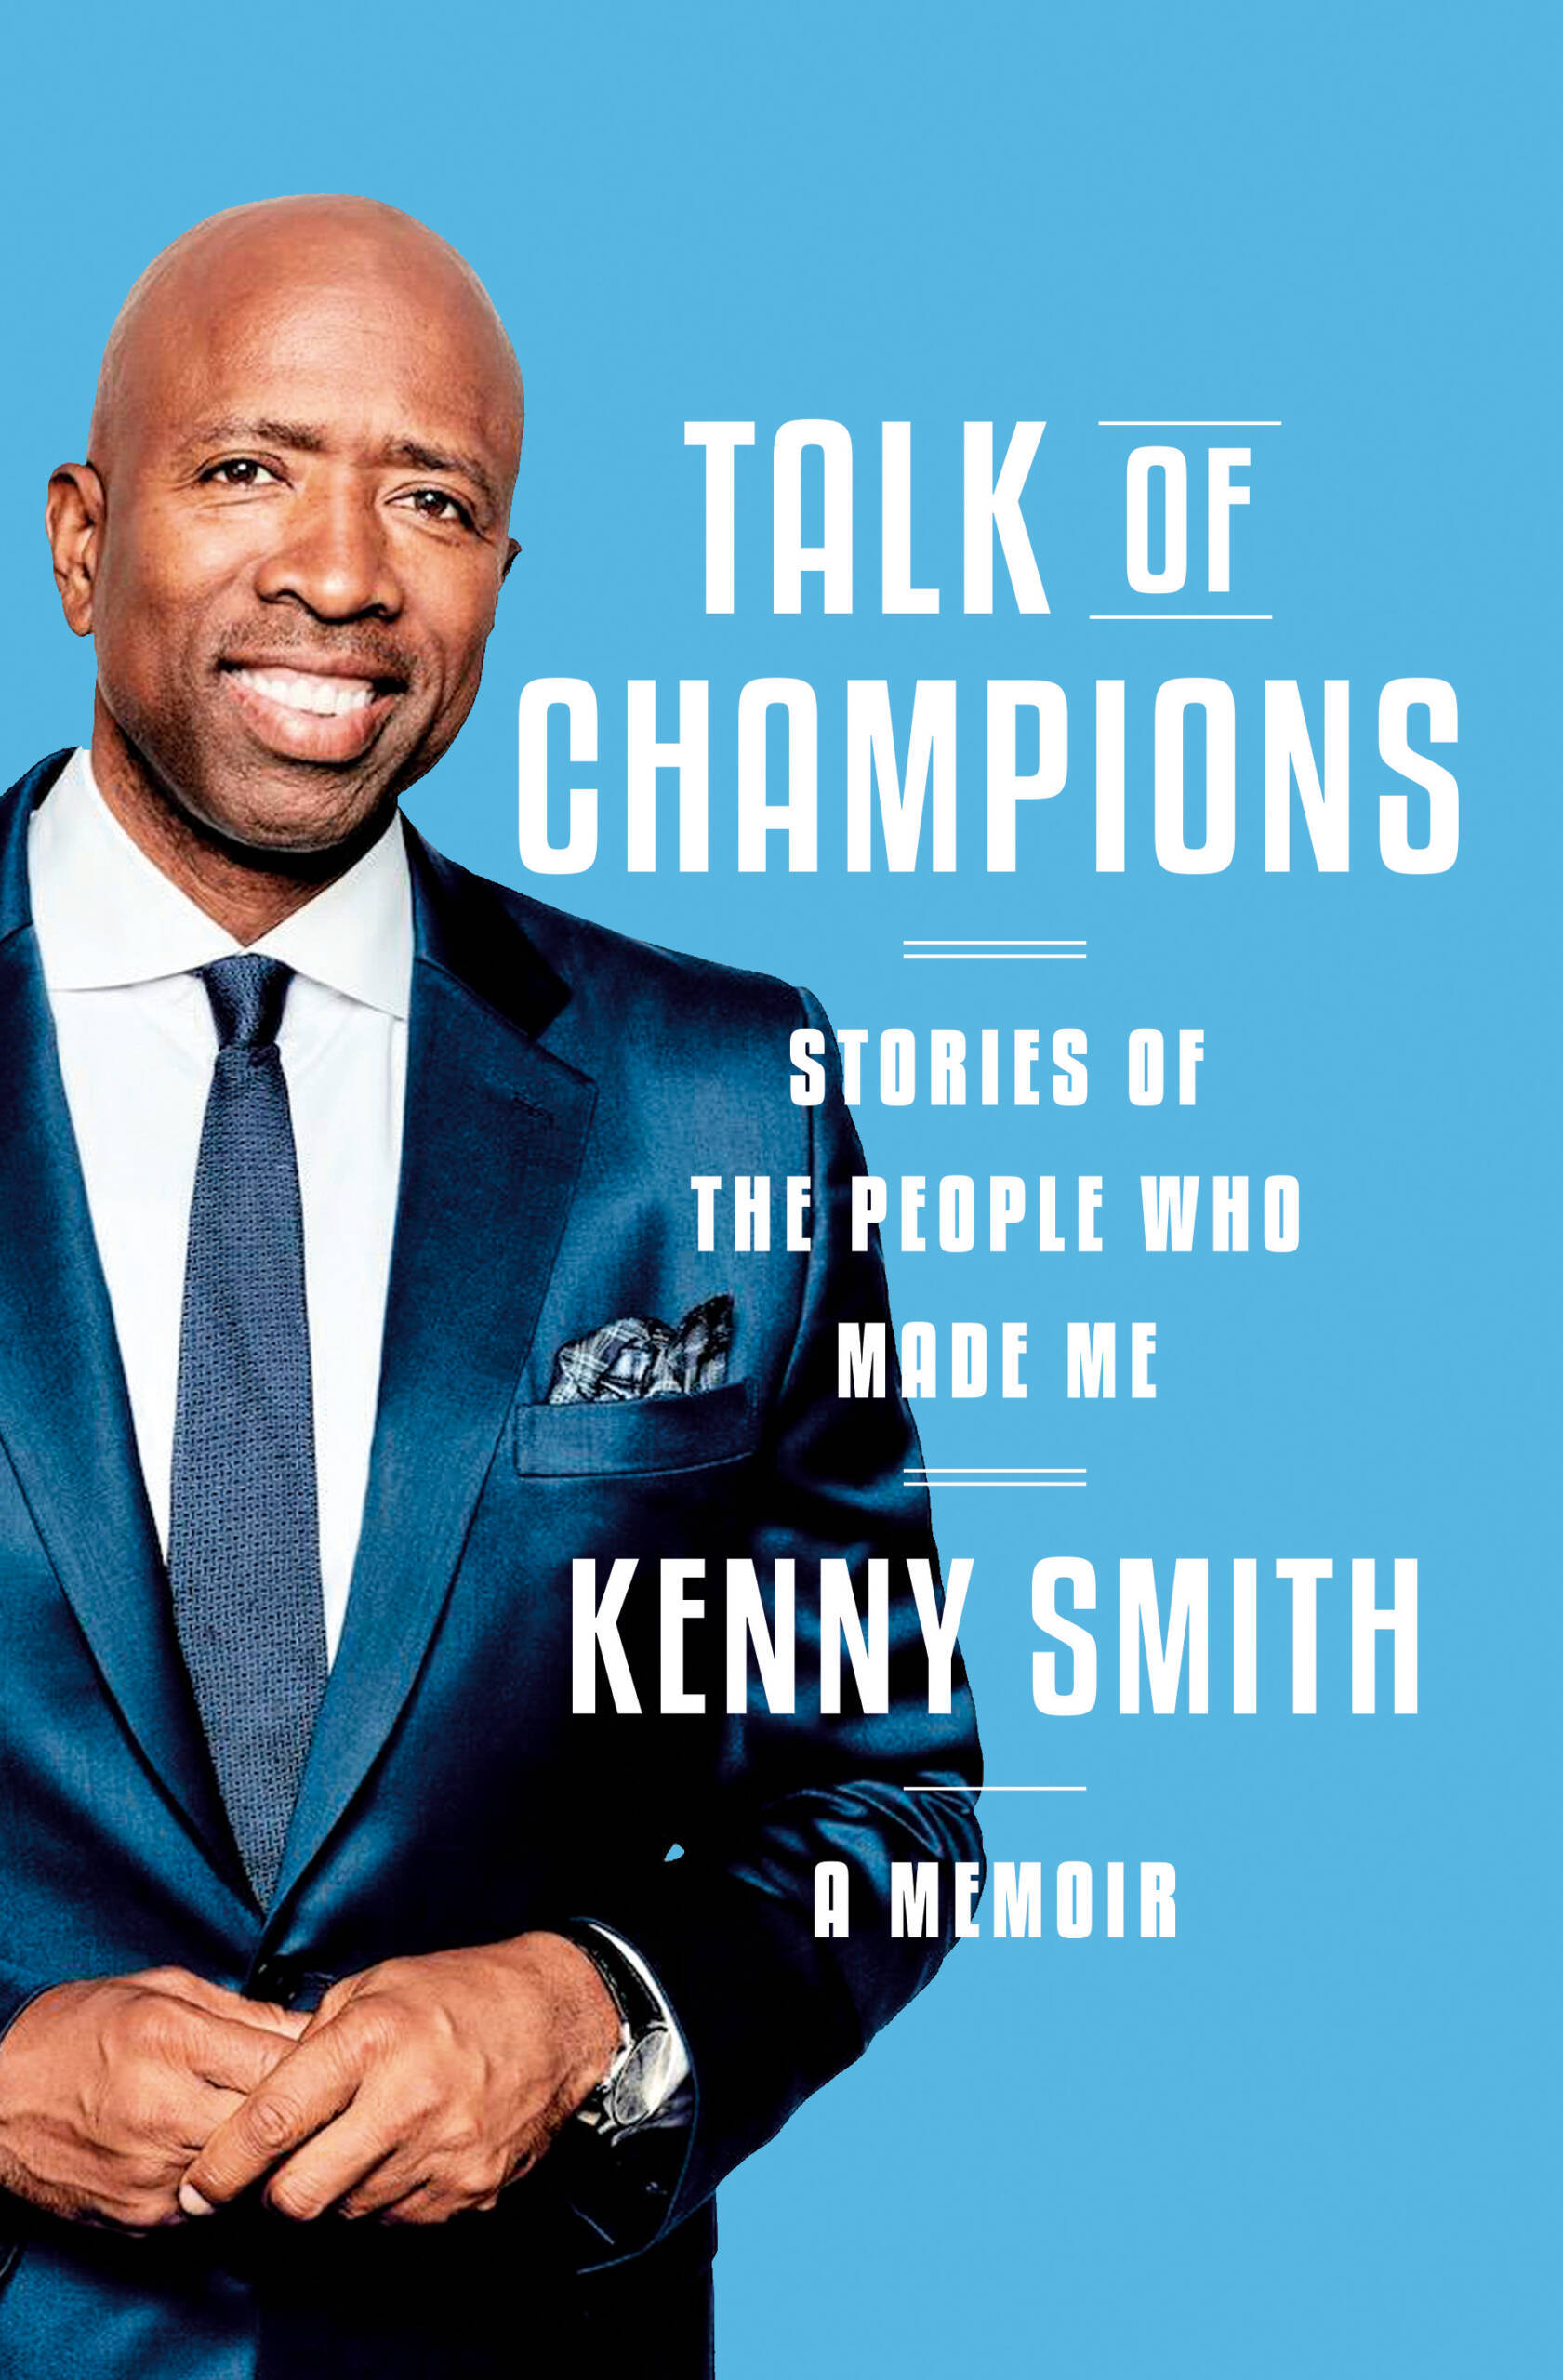 The cover of &quot;Talk of Champions&quot; by Kenny Smith. (Courtesy of Knopf Doubleday Publishing Group)